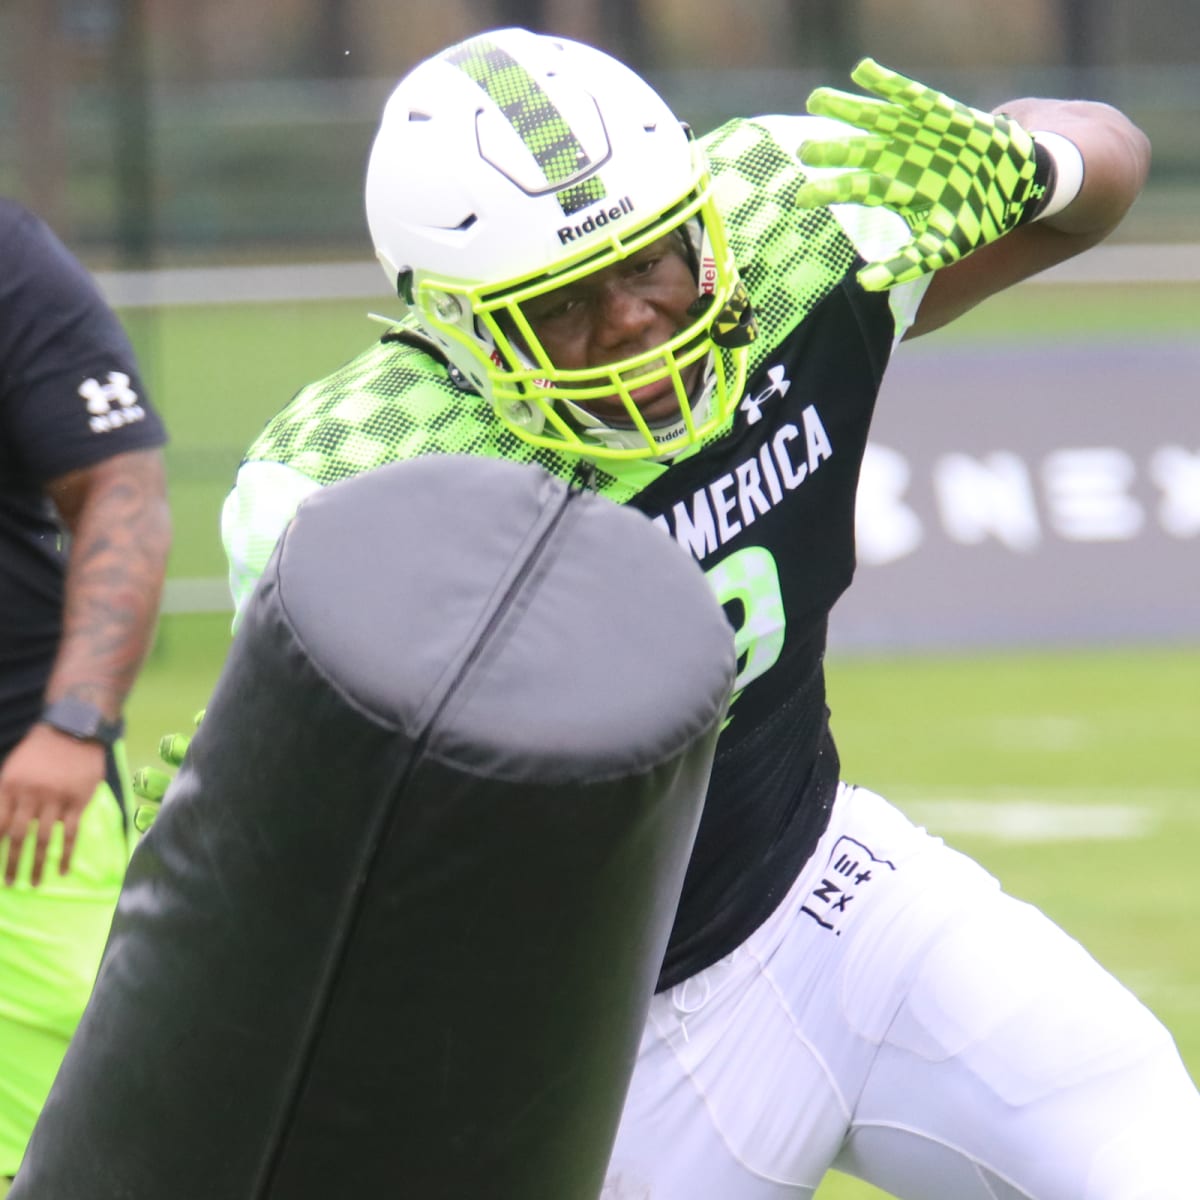 WATCH: Oklahoma Players Practice for Under Armour Game - Day 1 